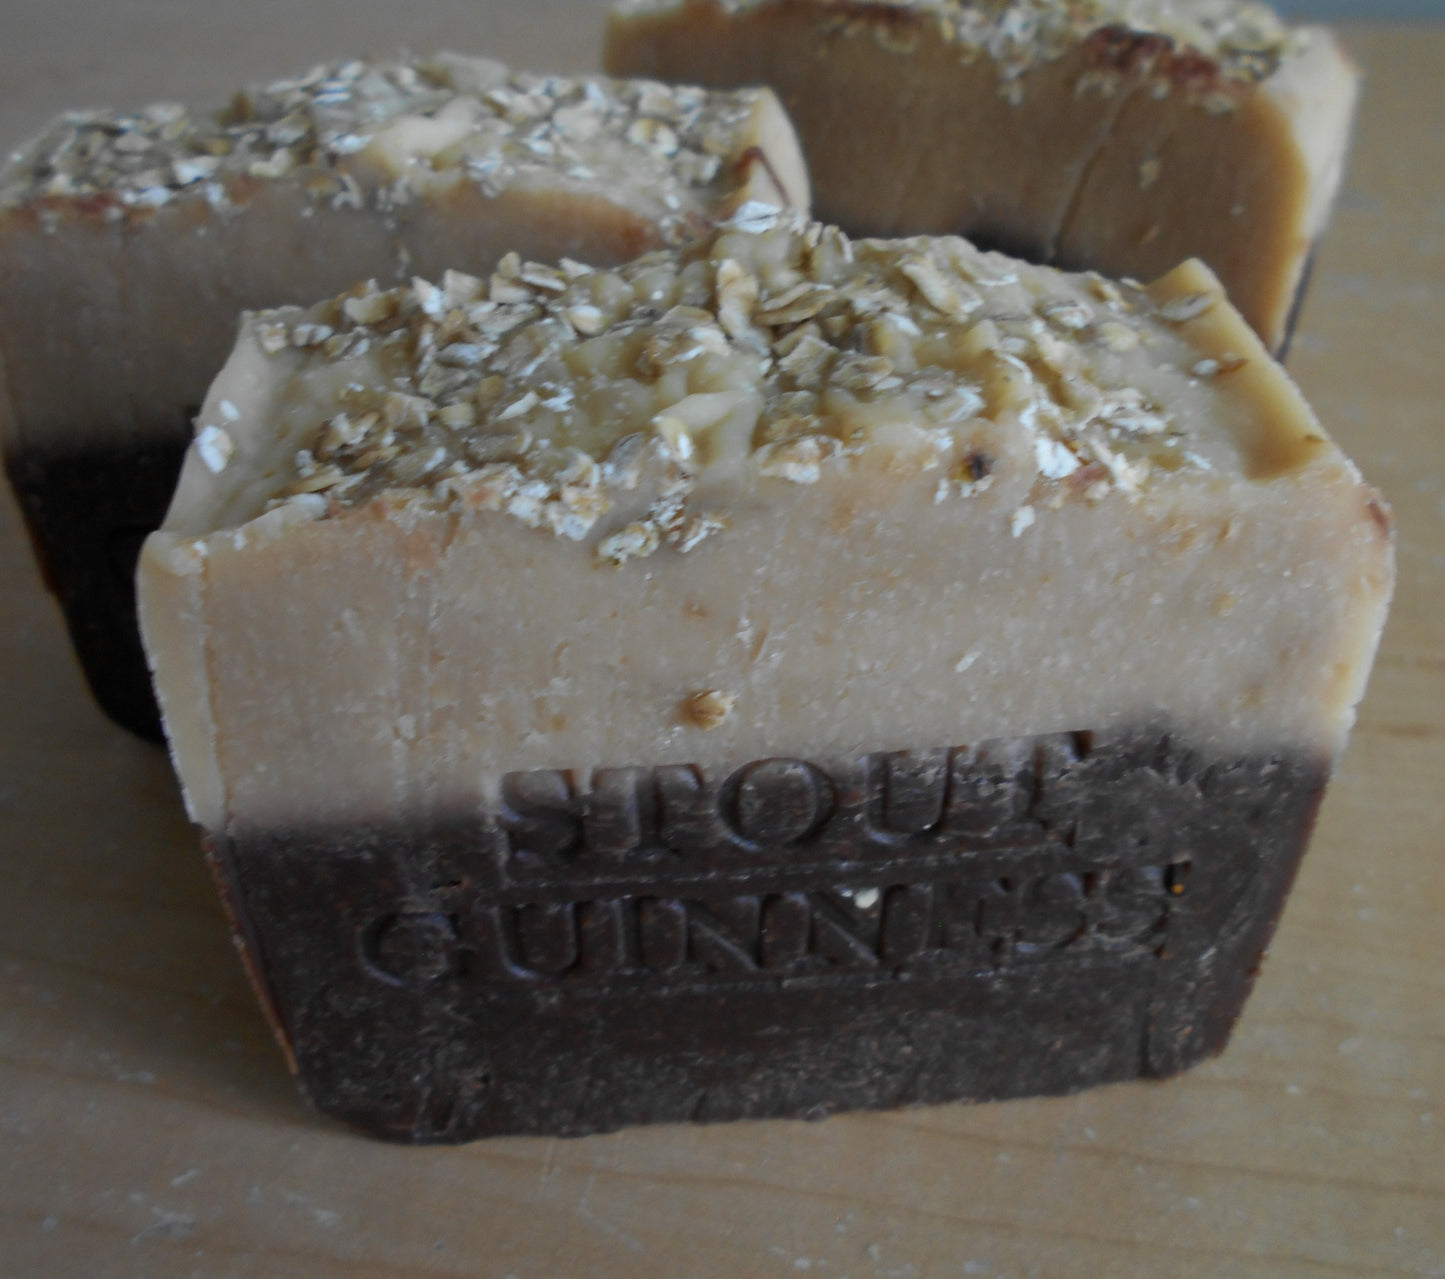 Guinness Extra Stout Handmade Soap - Beer Soap